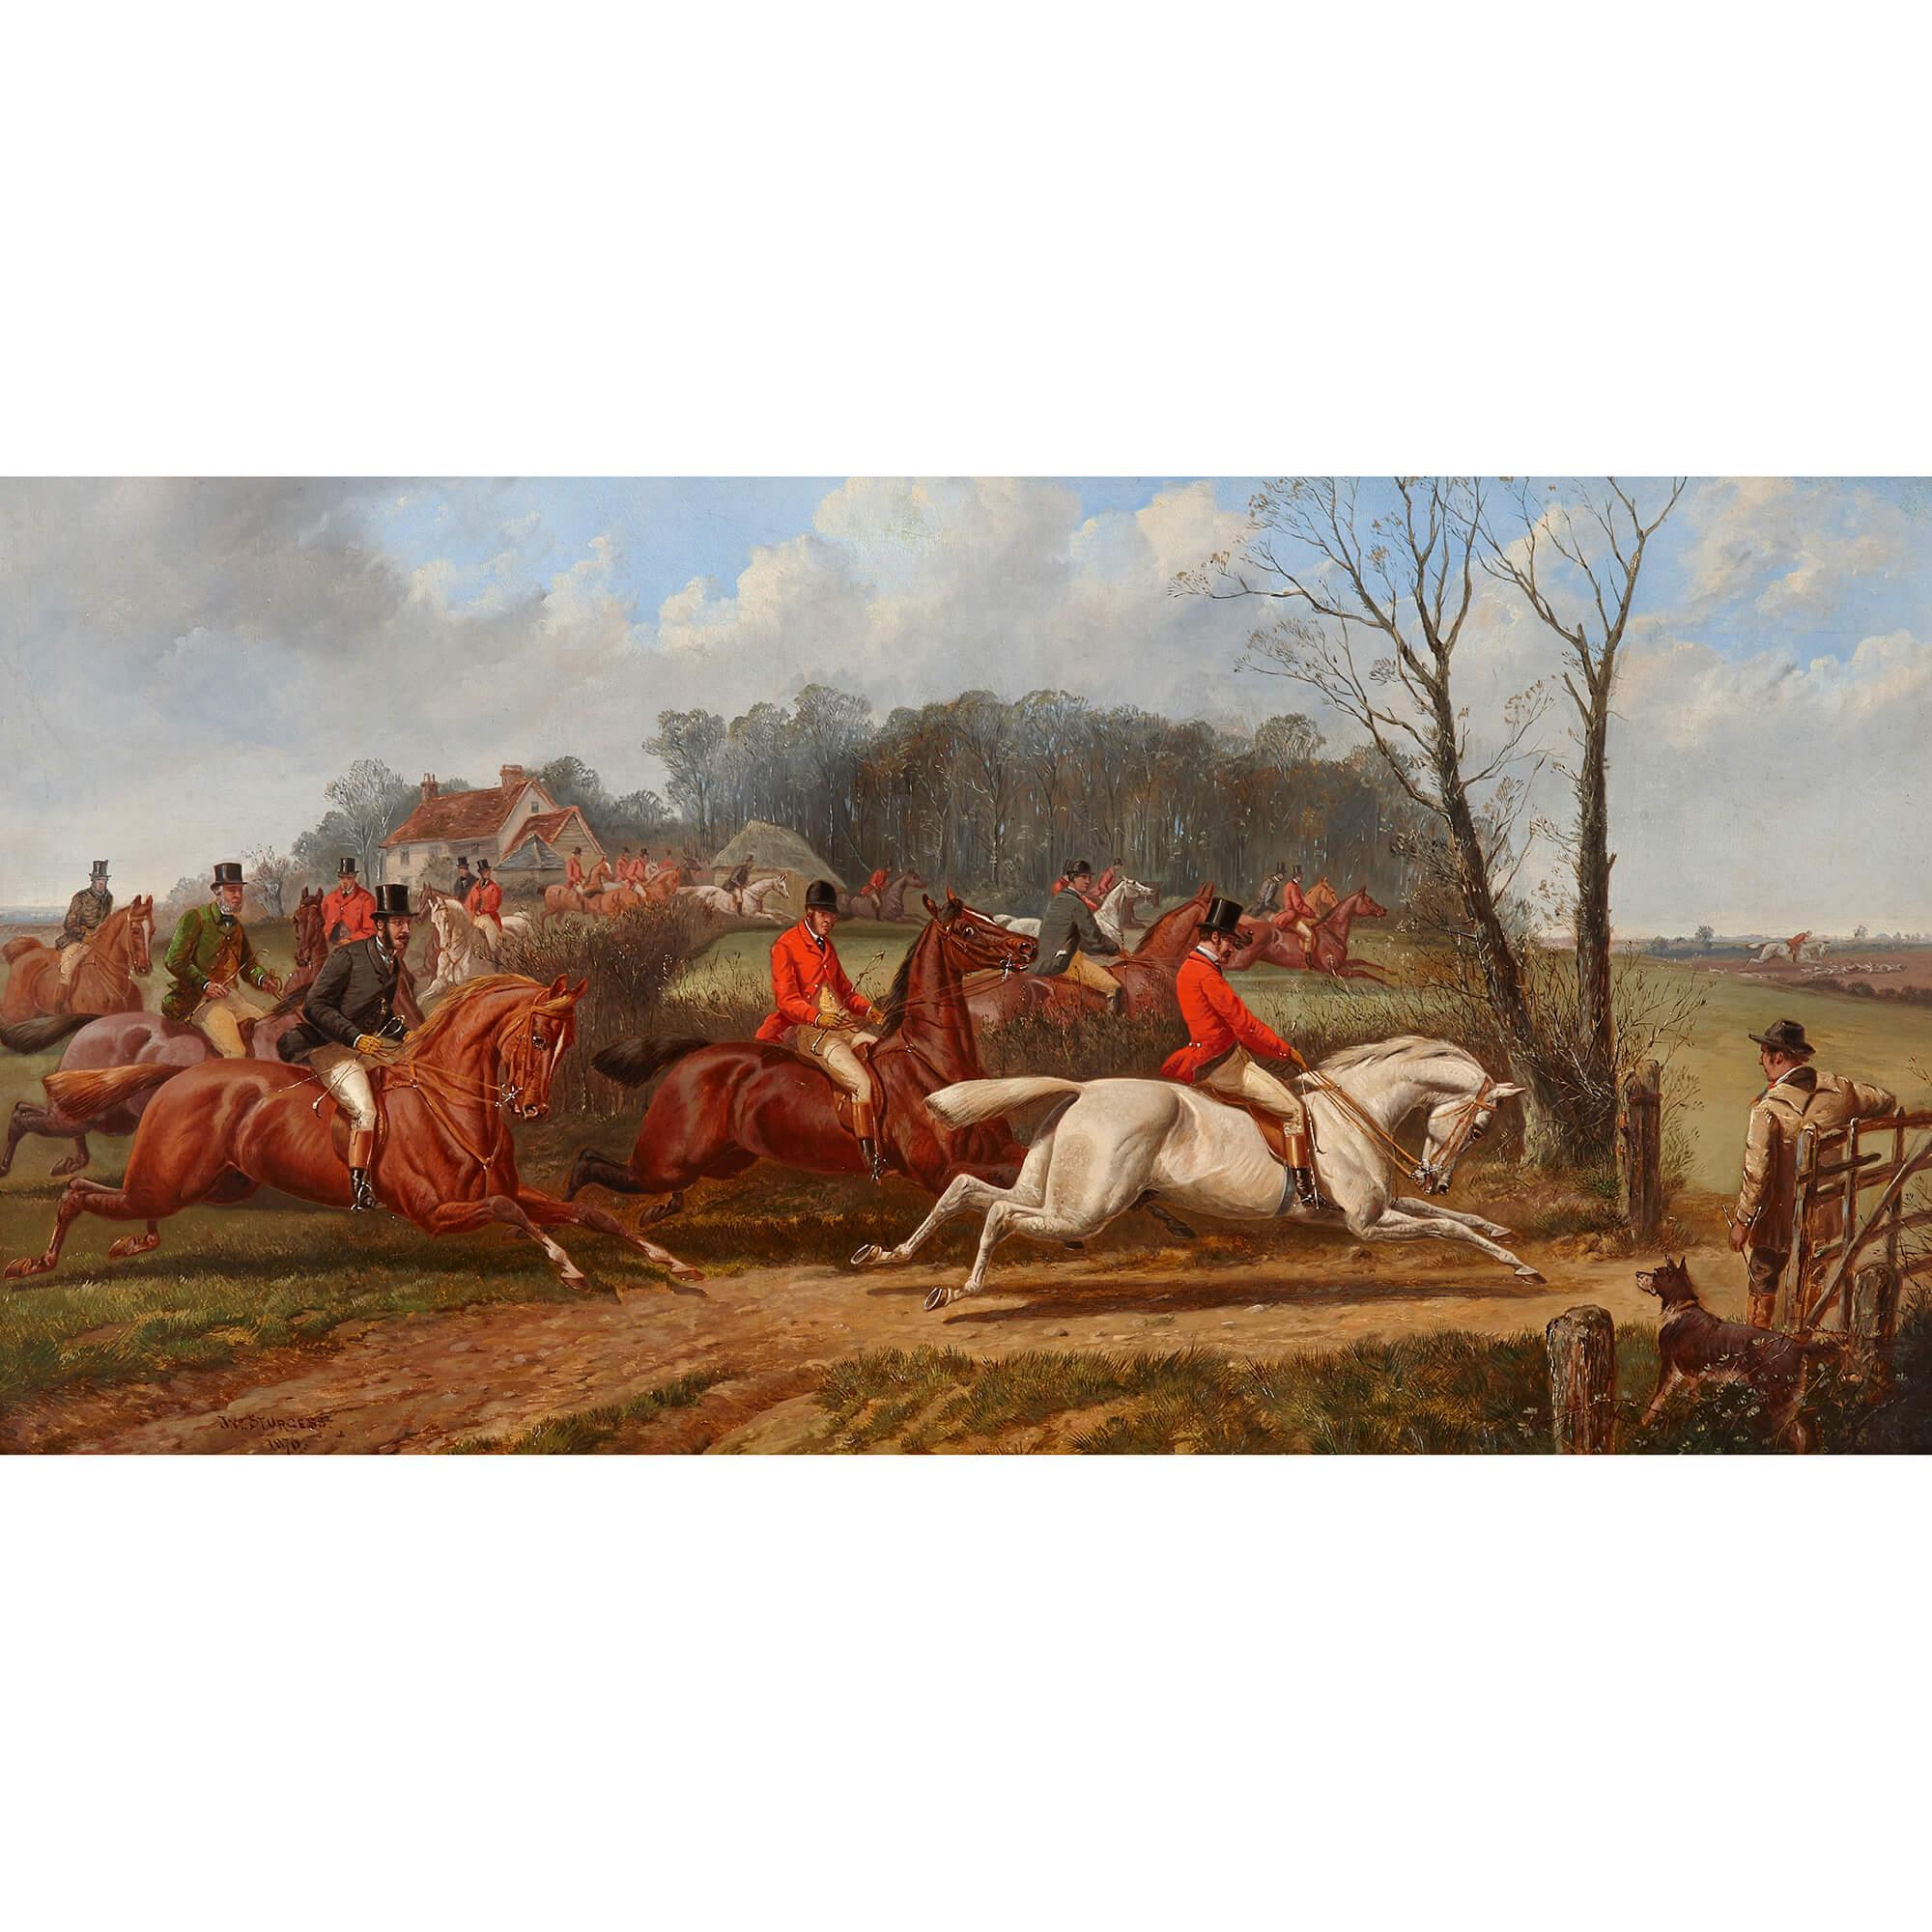 Pair of English antique horse paintings by Sturgess
English, 1870
Canvas: Height 36cm, width 69cm
Frame: Height 52cm, width 85cm, depth 6cm

Energetic equestrian-themed scenes are depicted by a British artist, John Sturgess (1869-1903). 

Titled